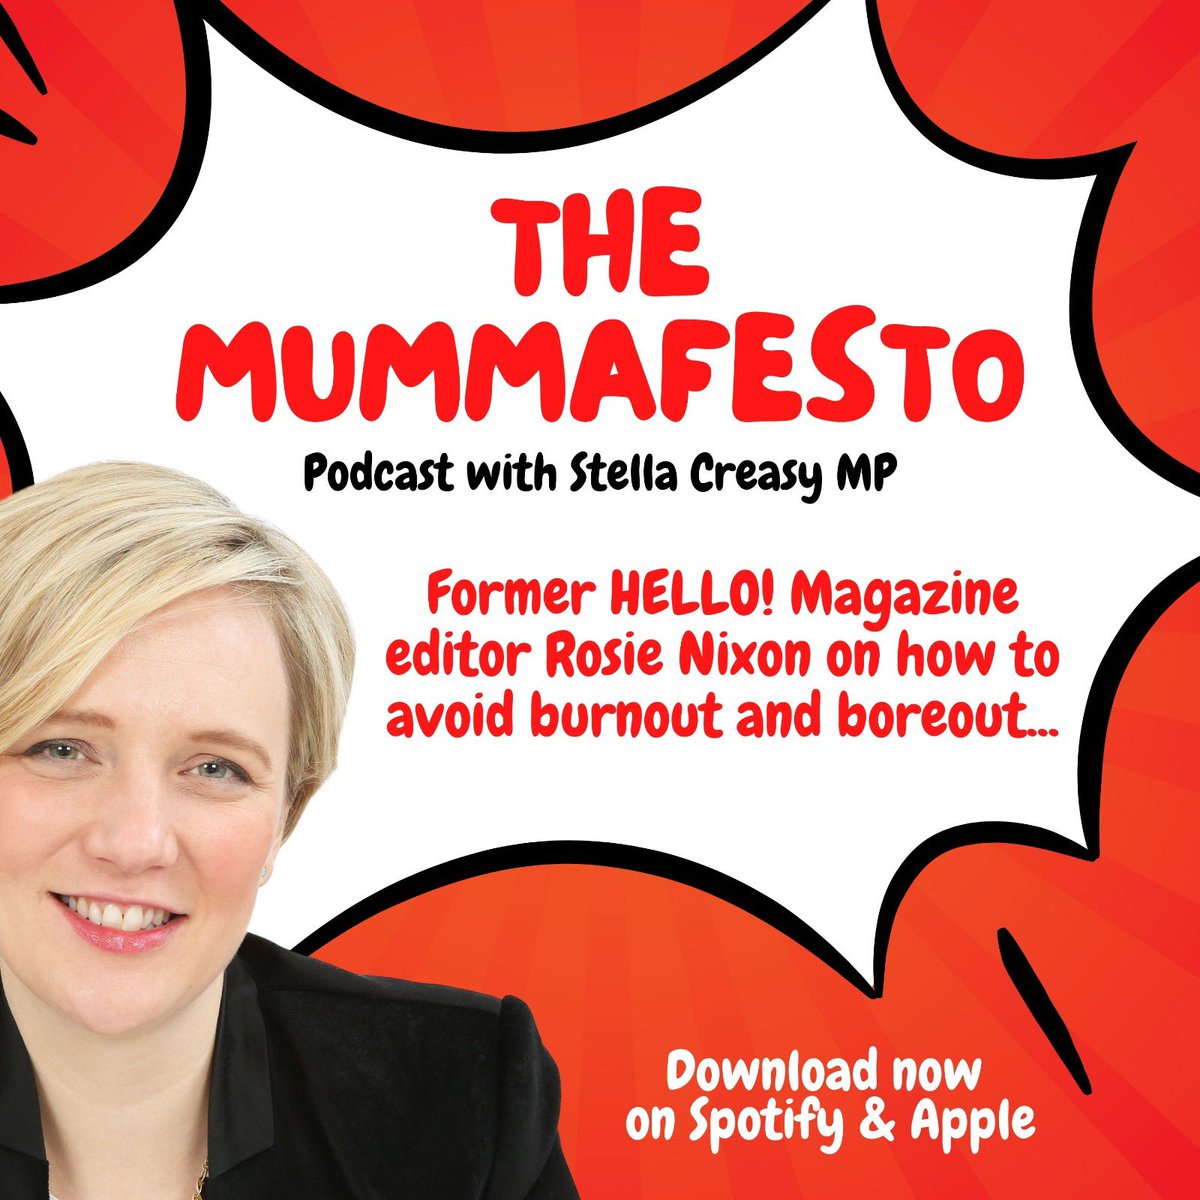 Wish you could spend the bank holiday asleep but know you will instead be doom scrolling work emails and kids activities? Listen to @Rosie_Nixon now on this weeks #mummafesto podcast on burnout and boreout and what could help - find it here on Spotify! open.spotify.com/episode/7CSmNk…